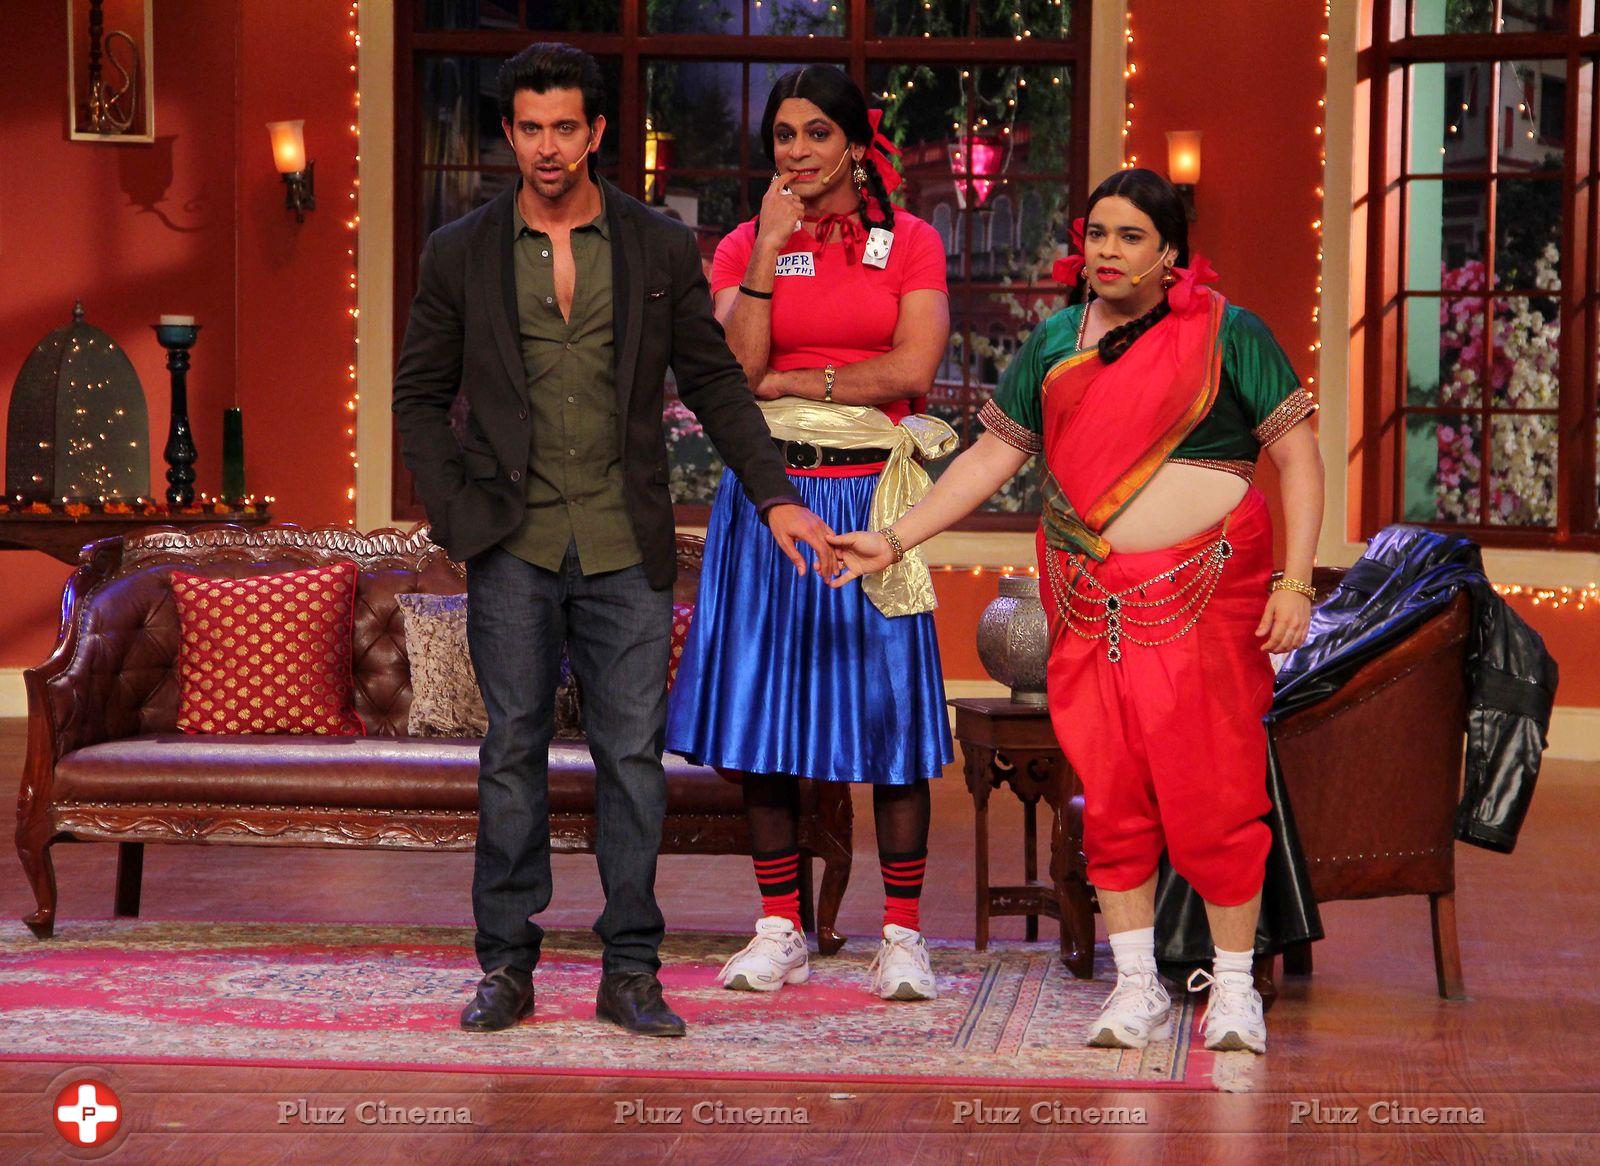 Hrithik Roshan - Hrithik Roshan Promotes Krrish 3 On the Sets Of Comedy Nights With Kapil Photos | Picture 611872